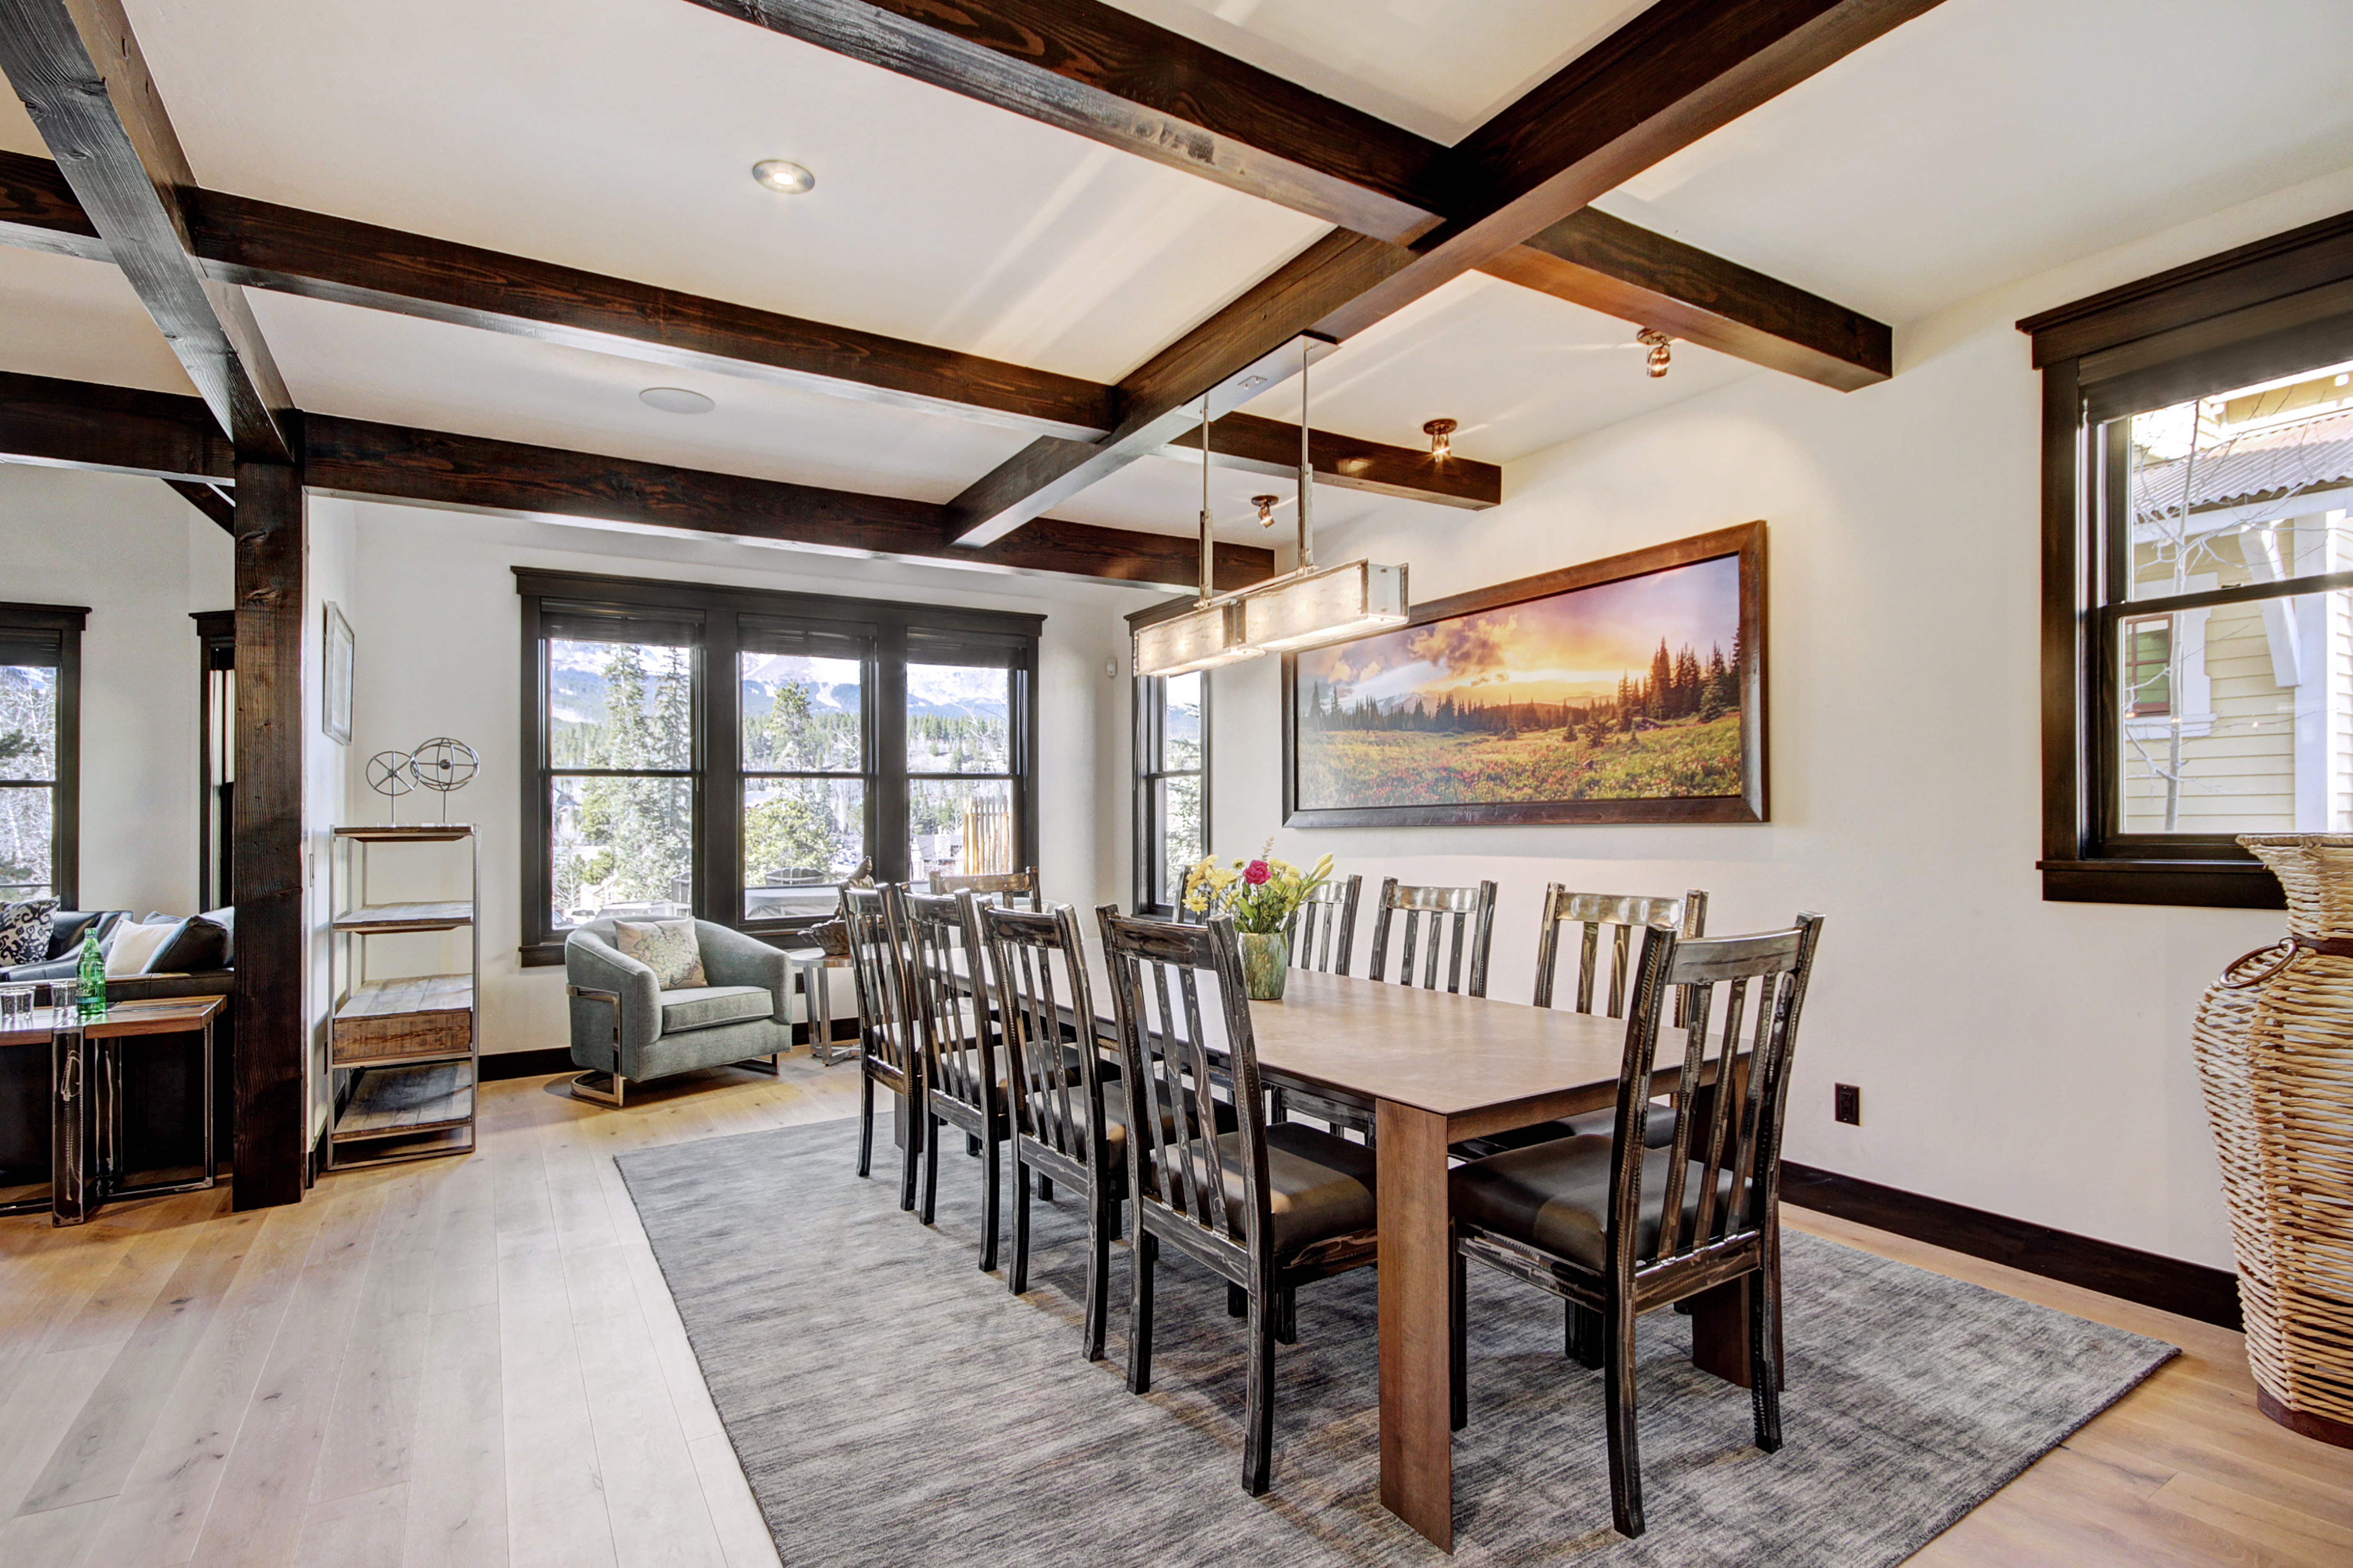 Dining Capacity – Up to 16 (10 at dining table, 6 at kitchen bar area) -  The Bogart House Breckenridge Vacation Rental